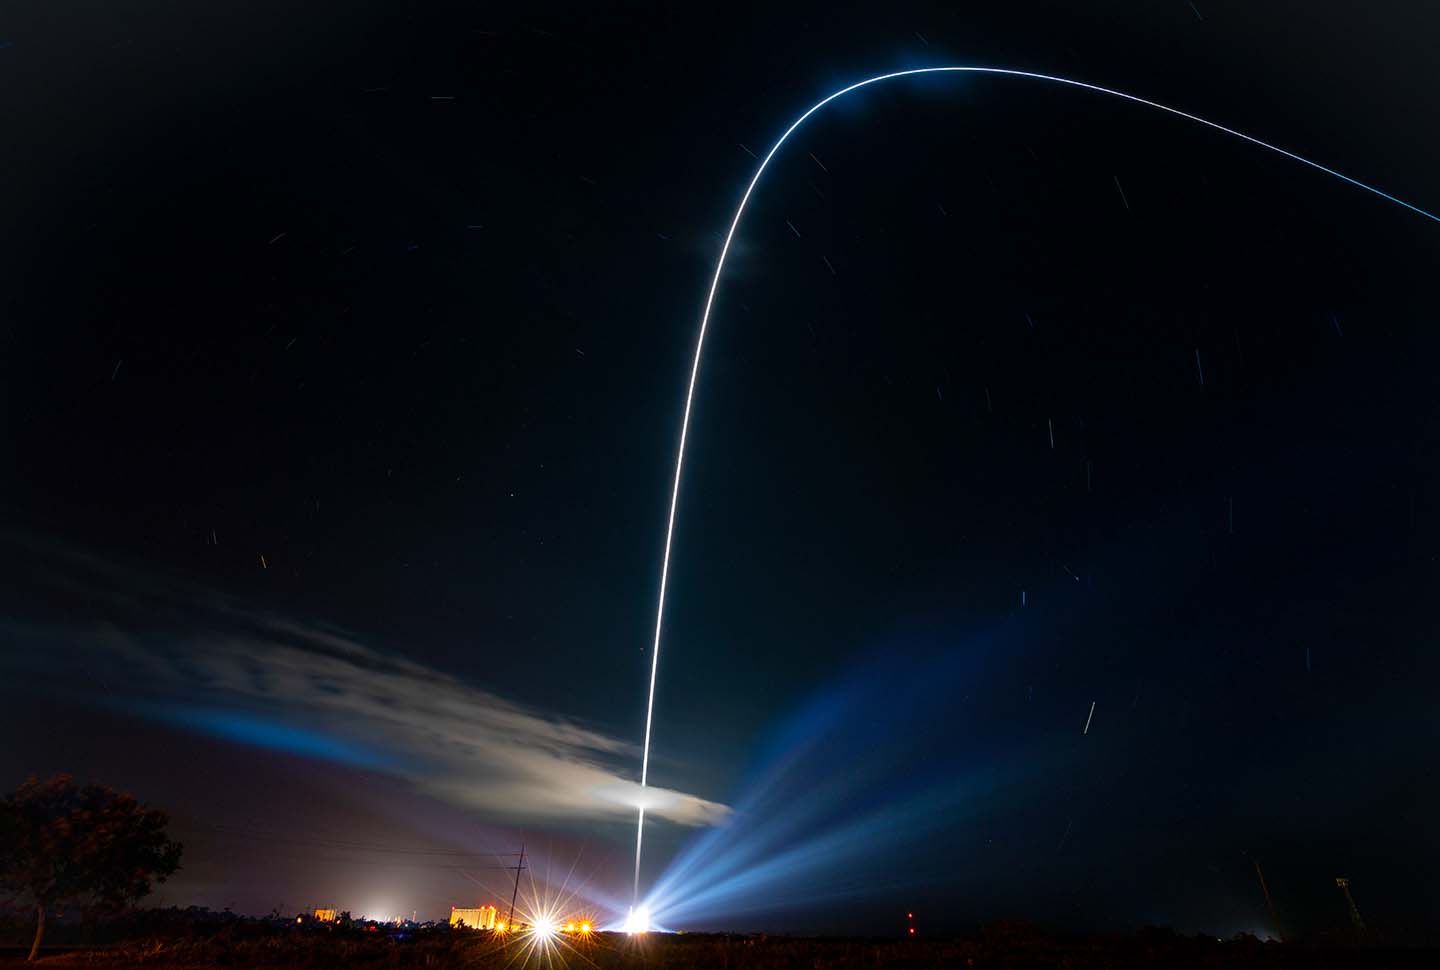 The Delta IV Heavy rocket carrying Parker Solar Probe is seen in this long exposure photograph